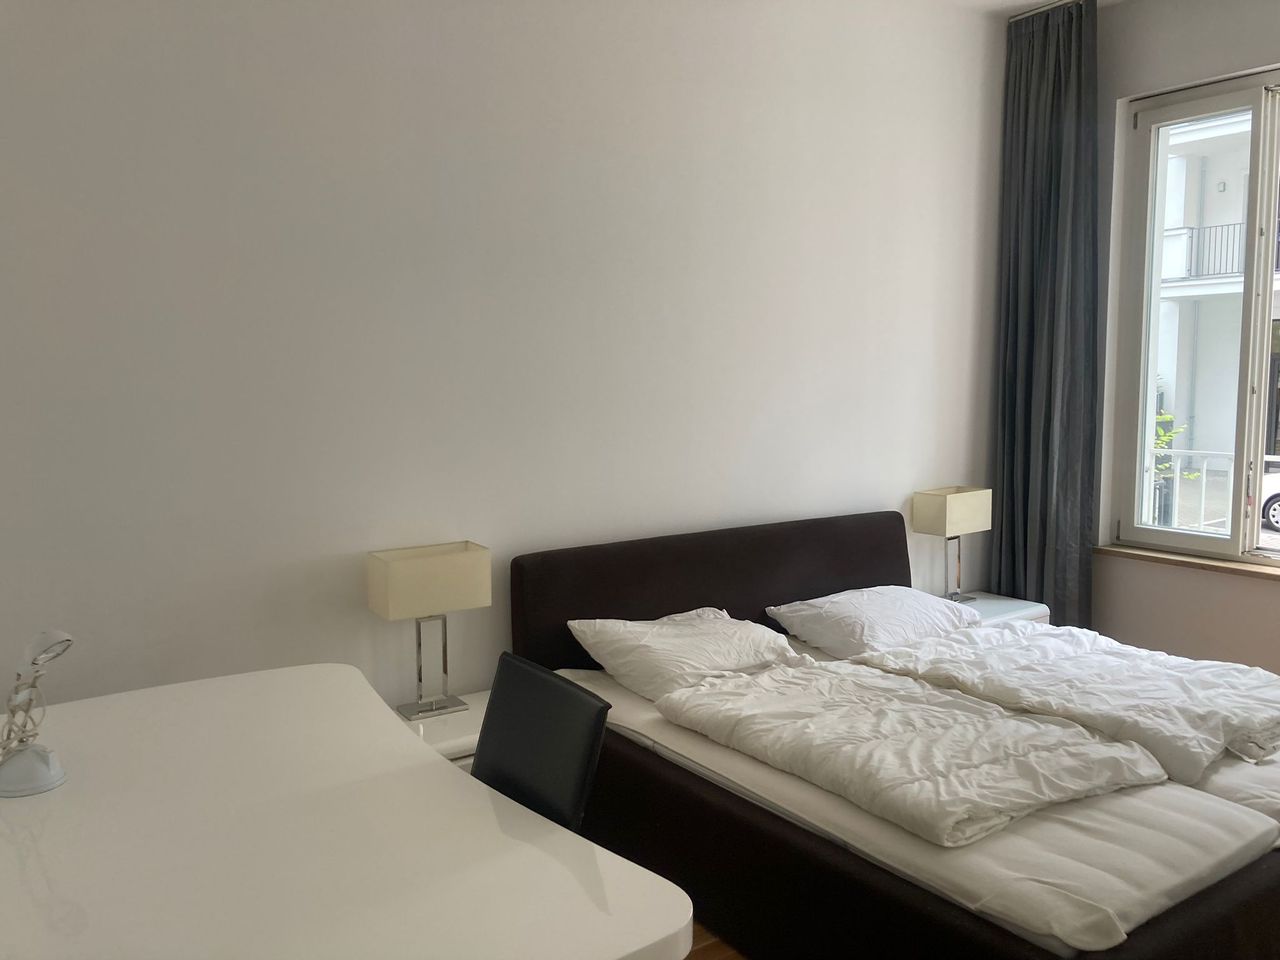 Comfortable 2 room apartment in central location in Berlin